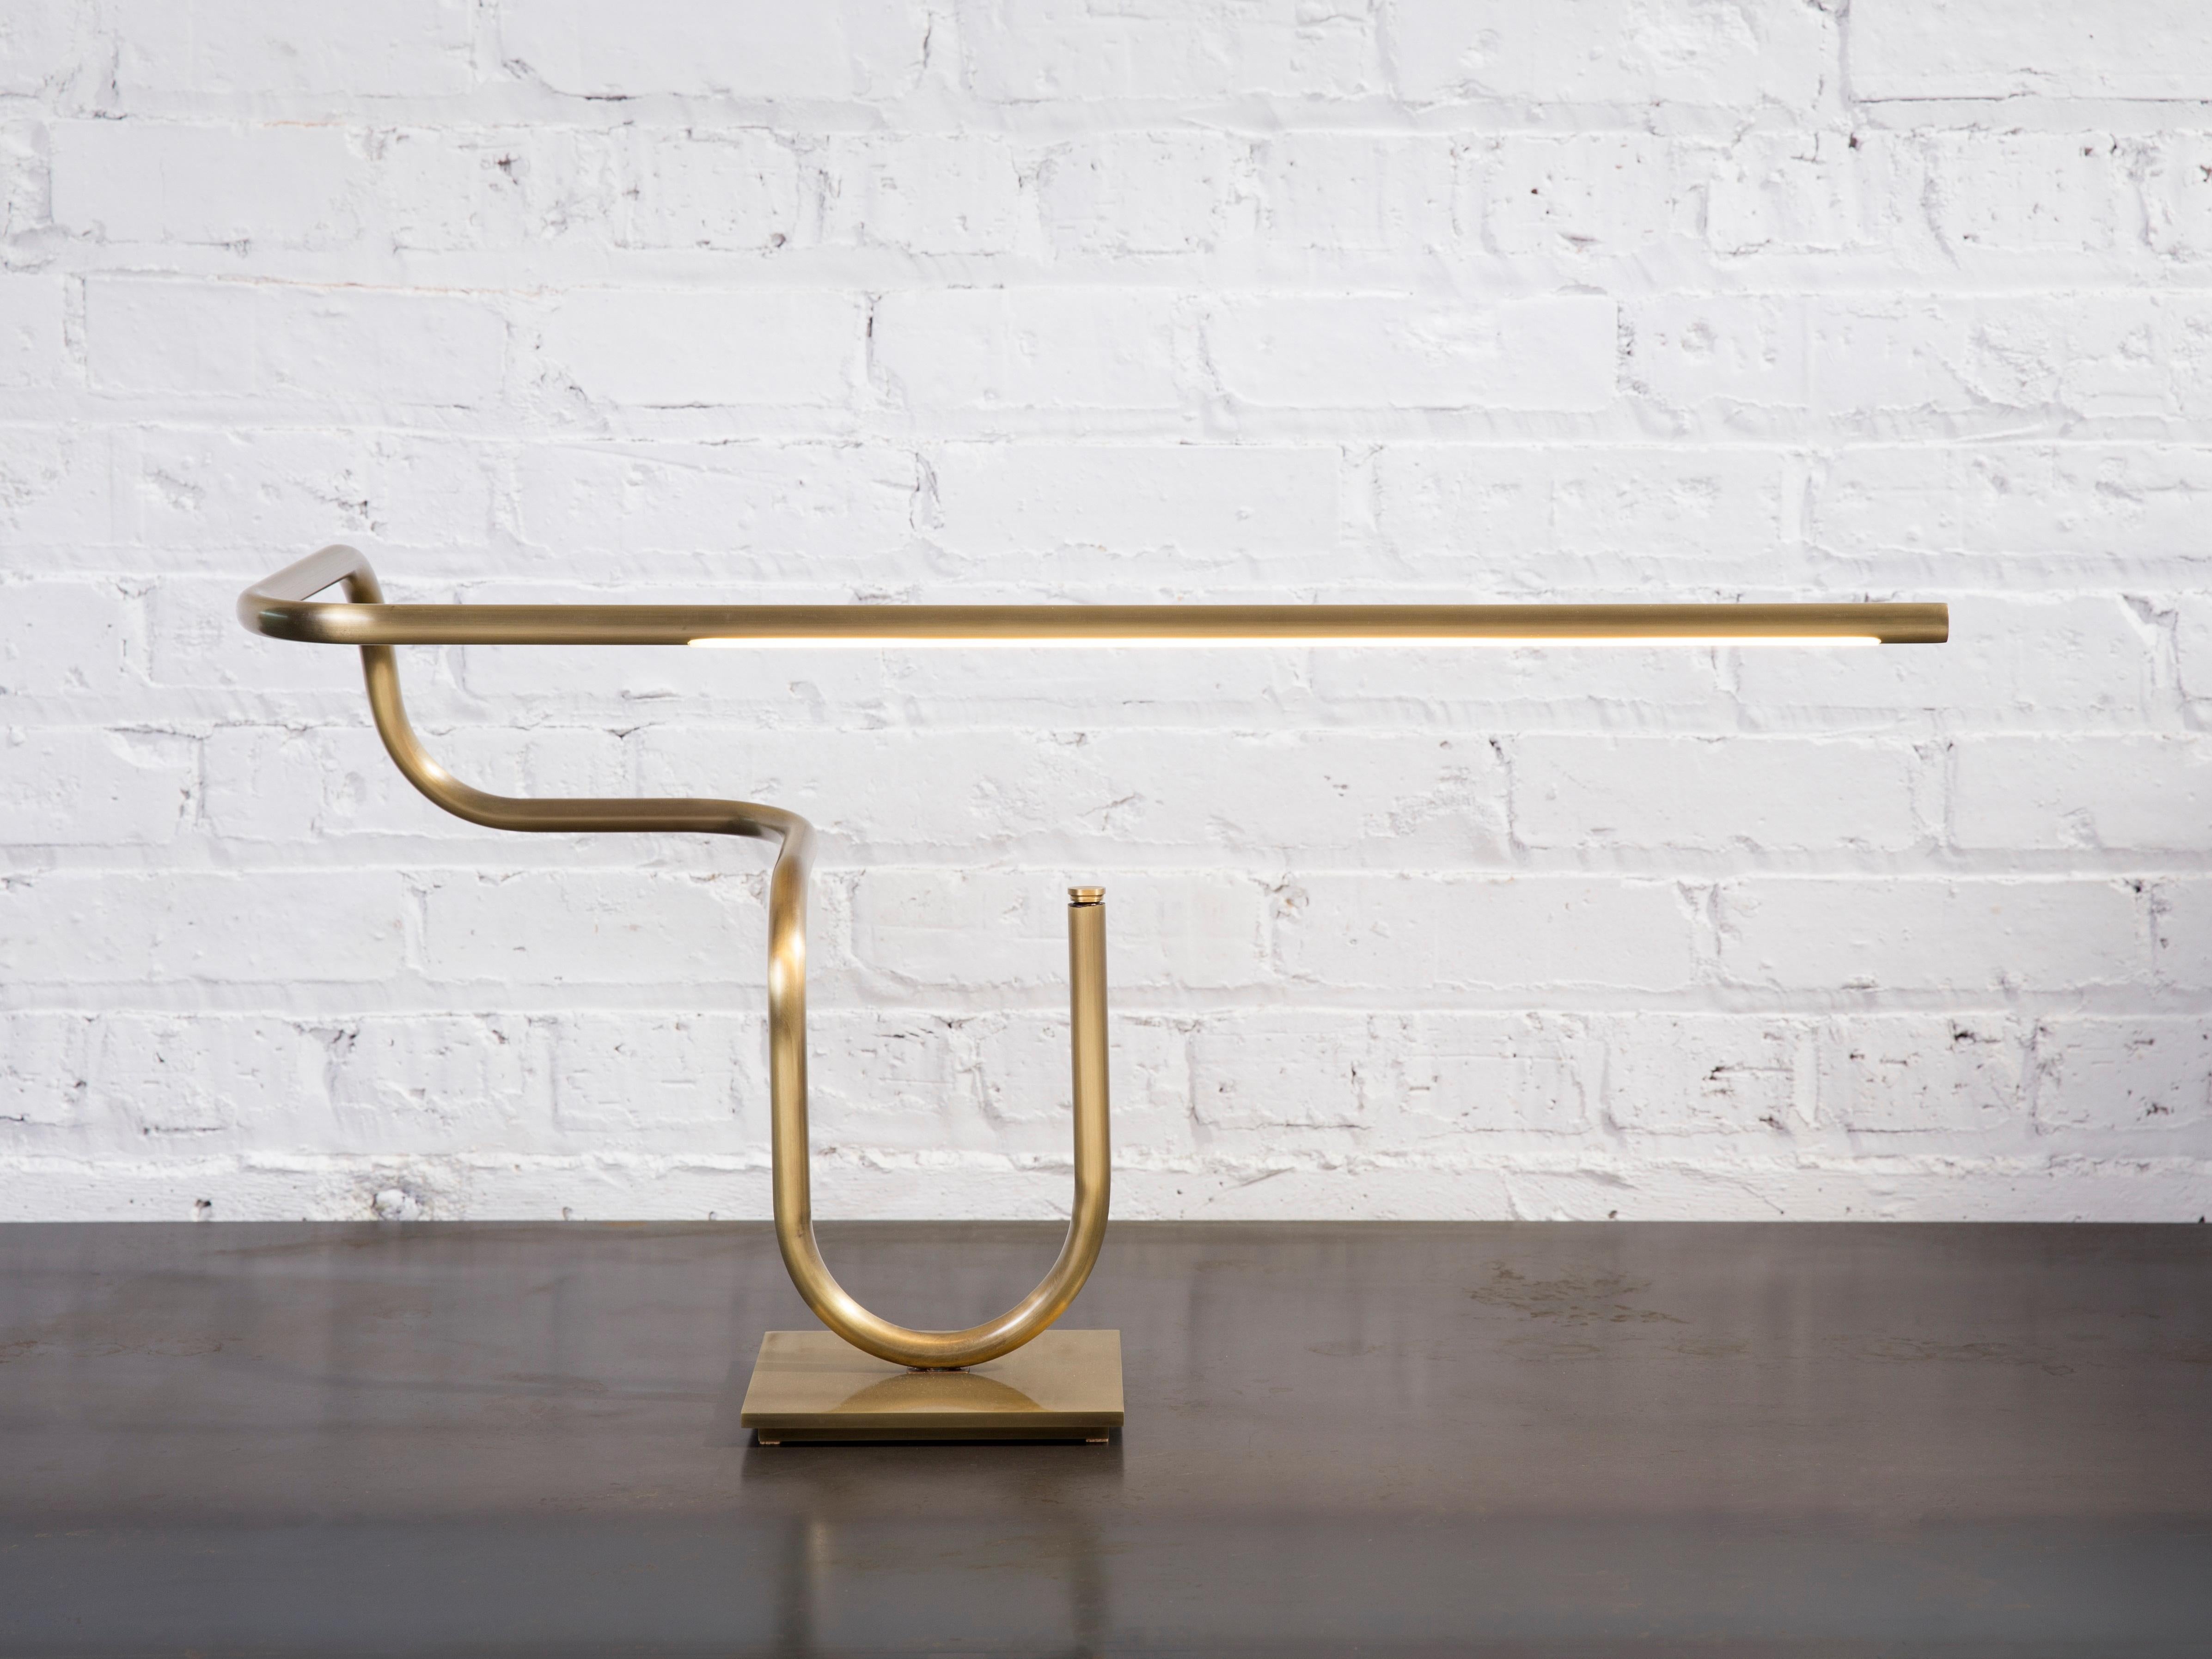 Tube table lamp by Gentner Design
Dimensions: D 60 x W 35.5 x H 35.5 cm
Materials: tarnished brass
Available in darkened brass and tarnished brass.

All our lamps can be wired according to each country. If sold to the USA it will be wired for